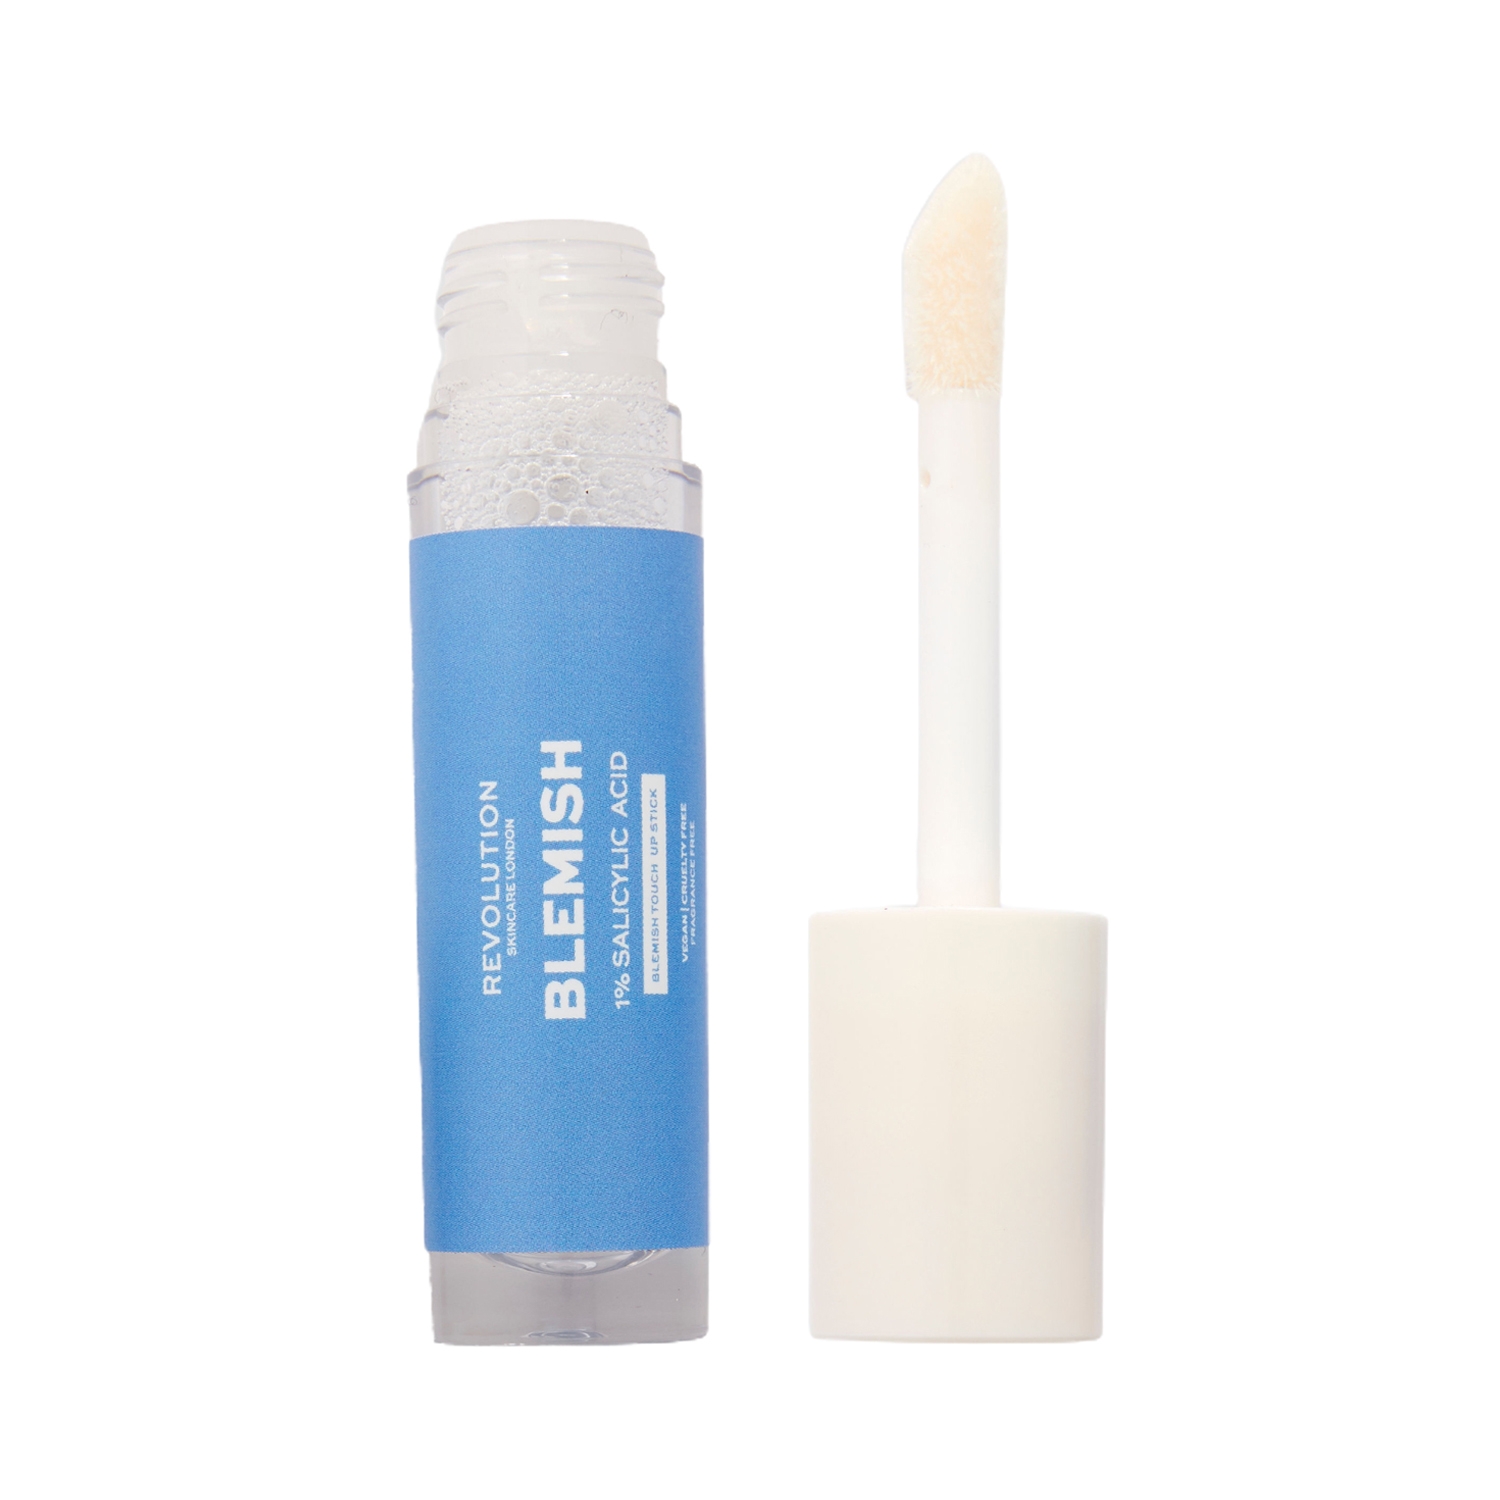 Makeup Revolution | Makeup Revolution Skin Care Anytime Anywhere 1% Salicylic Acid Blemish Touch Up Stick (9ml)